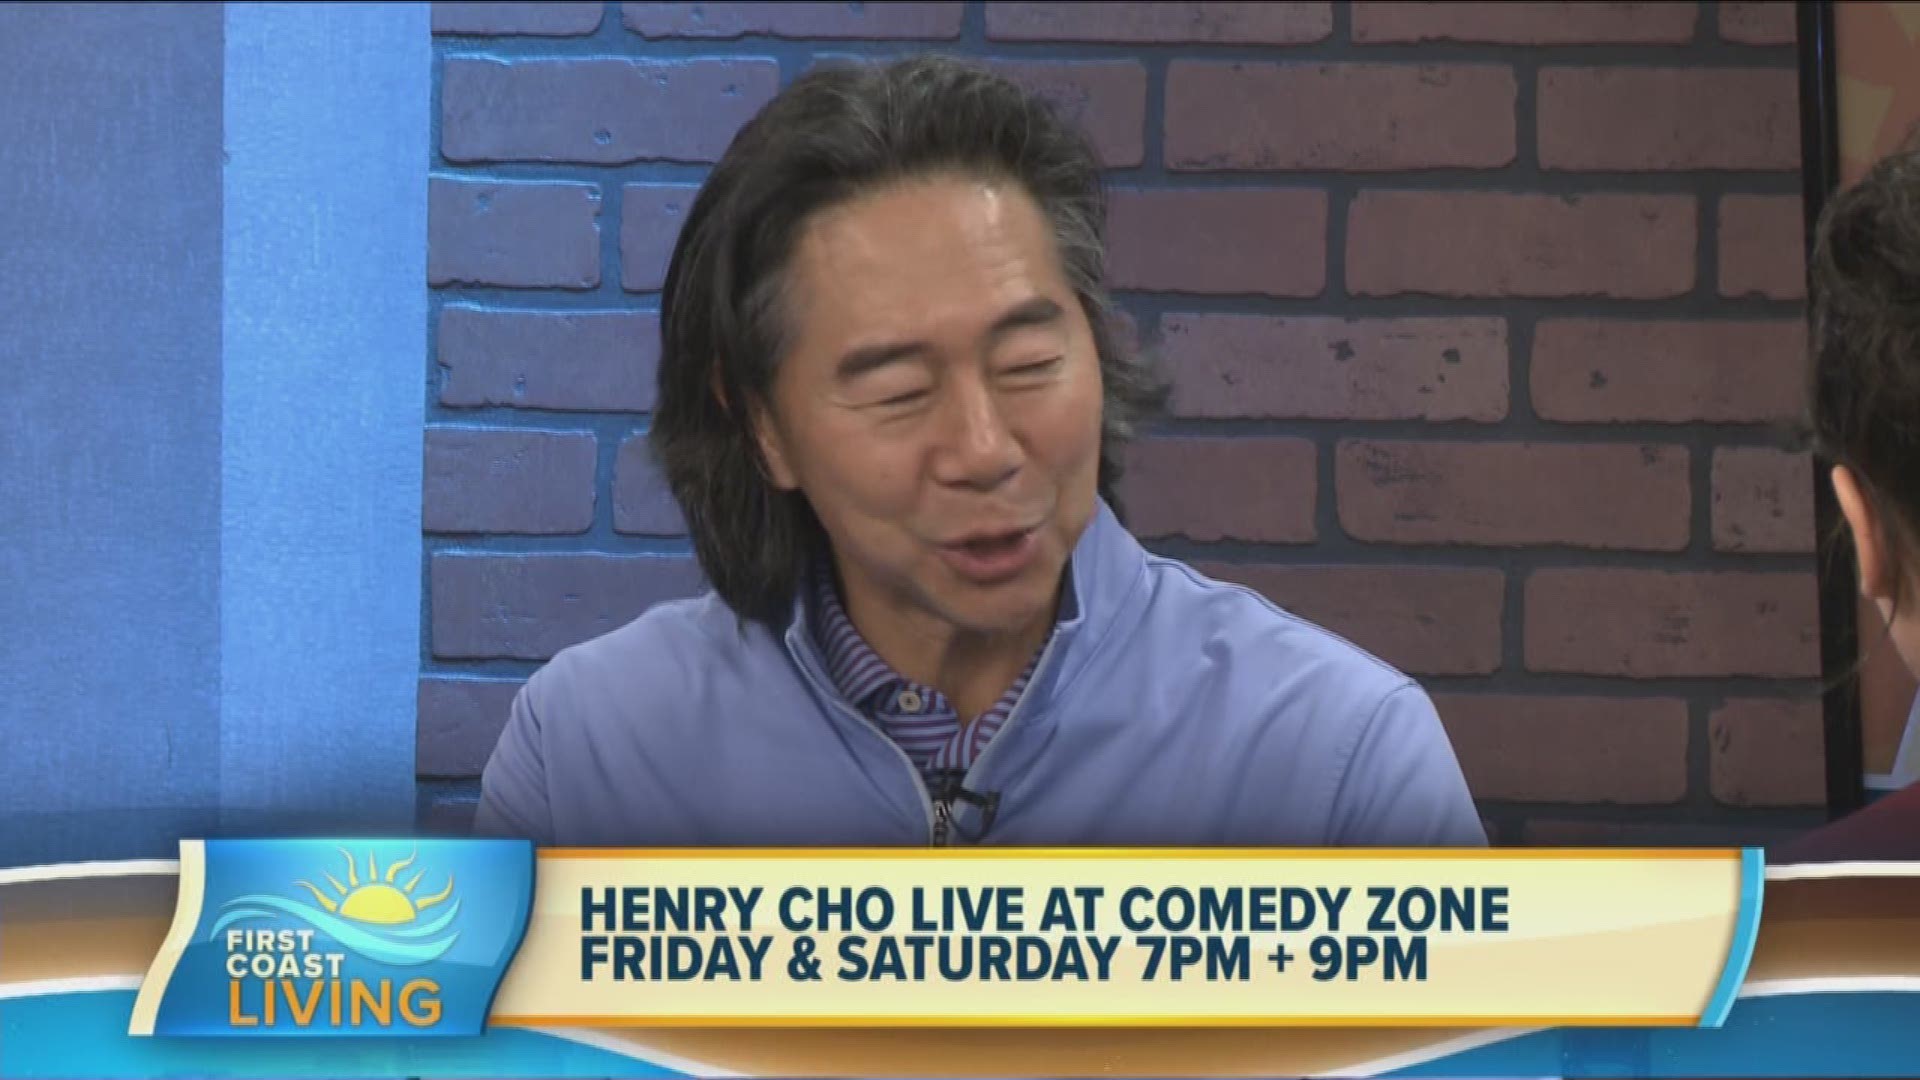 Get ready to laugh with comedian Henry Cho.